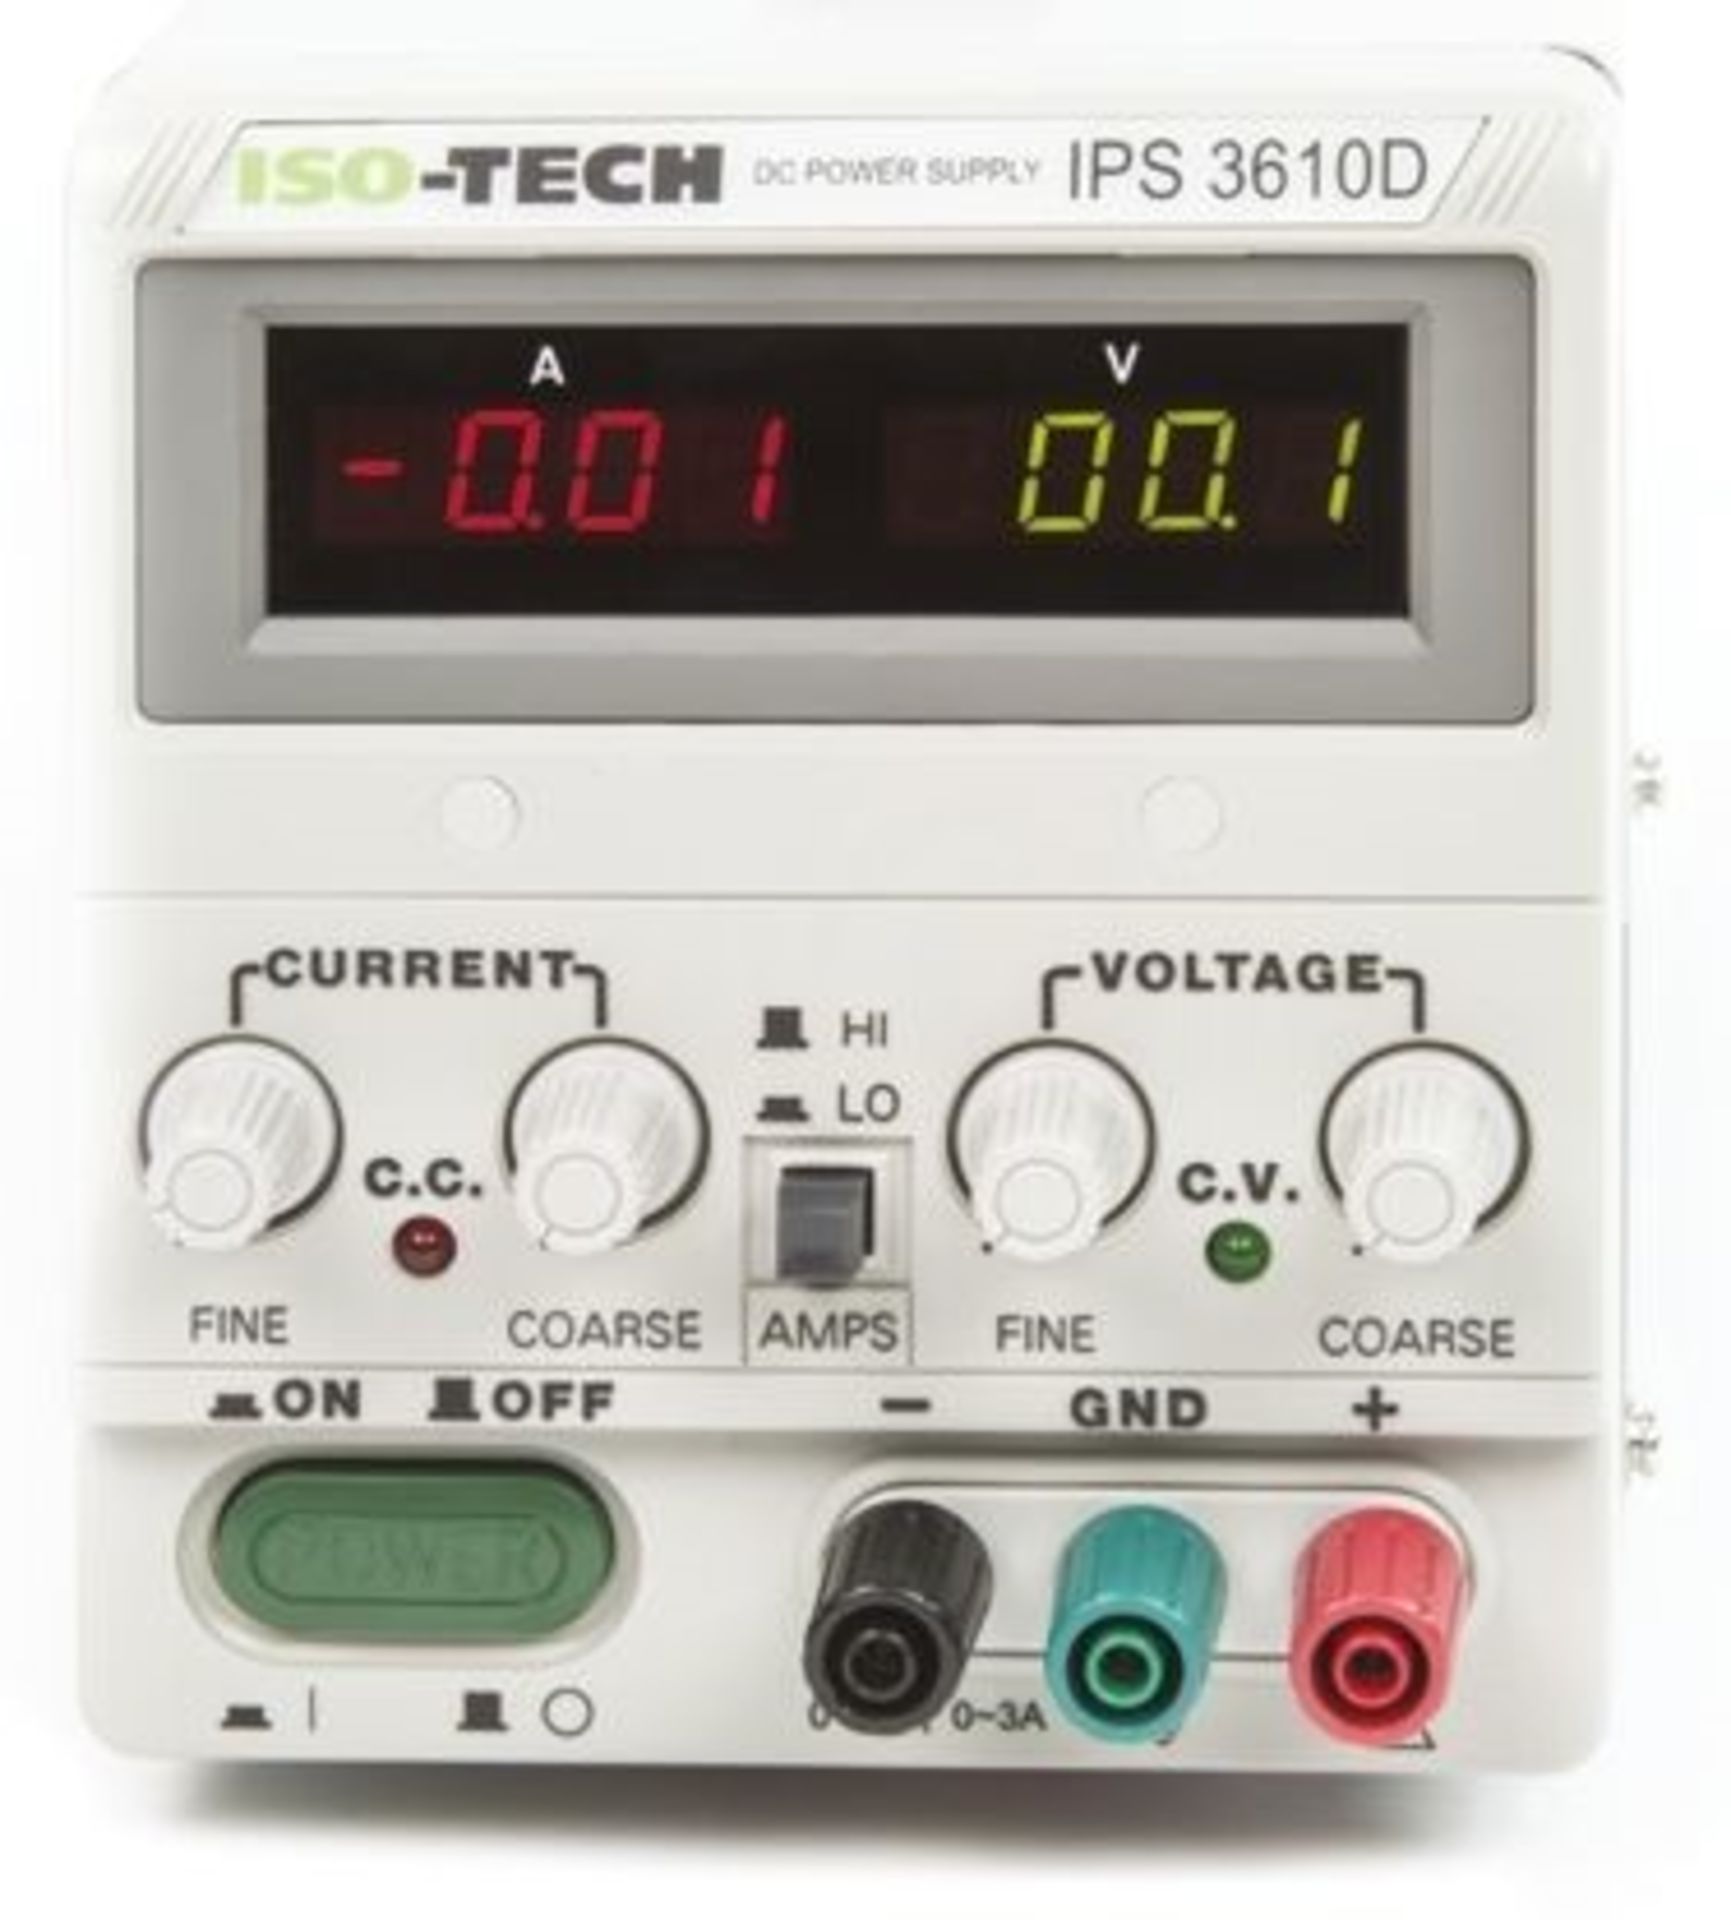 ISO-TECH IPS-3610D Digital Bench Power Supply, 1 Output 0-36V 0-10A 500W